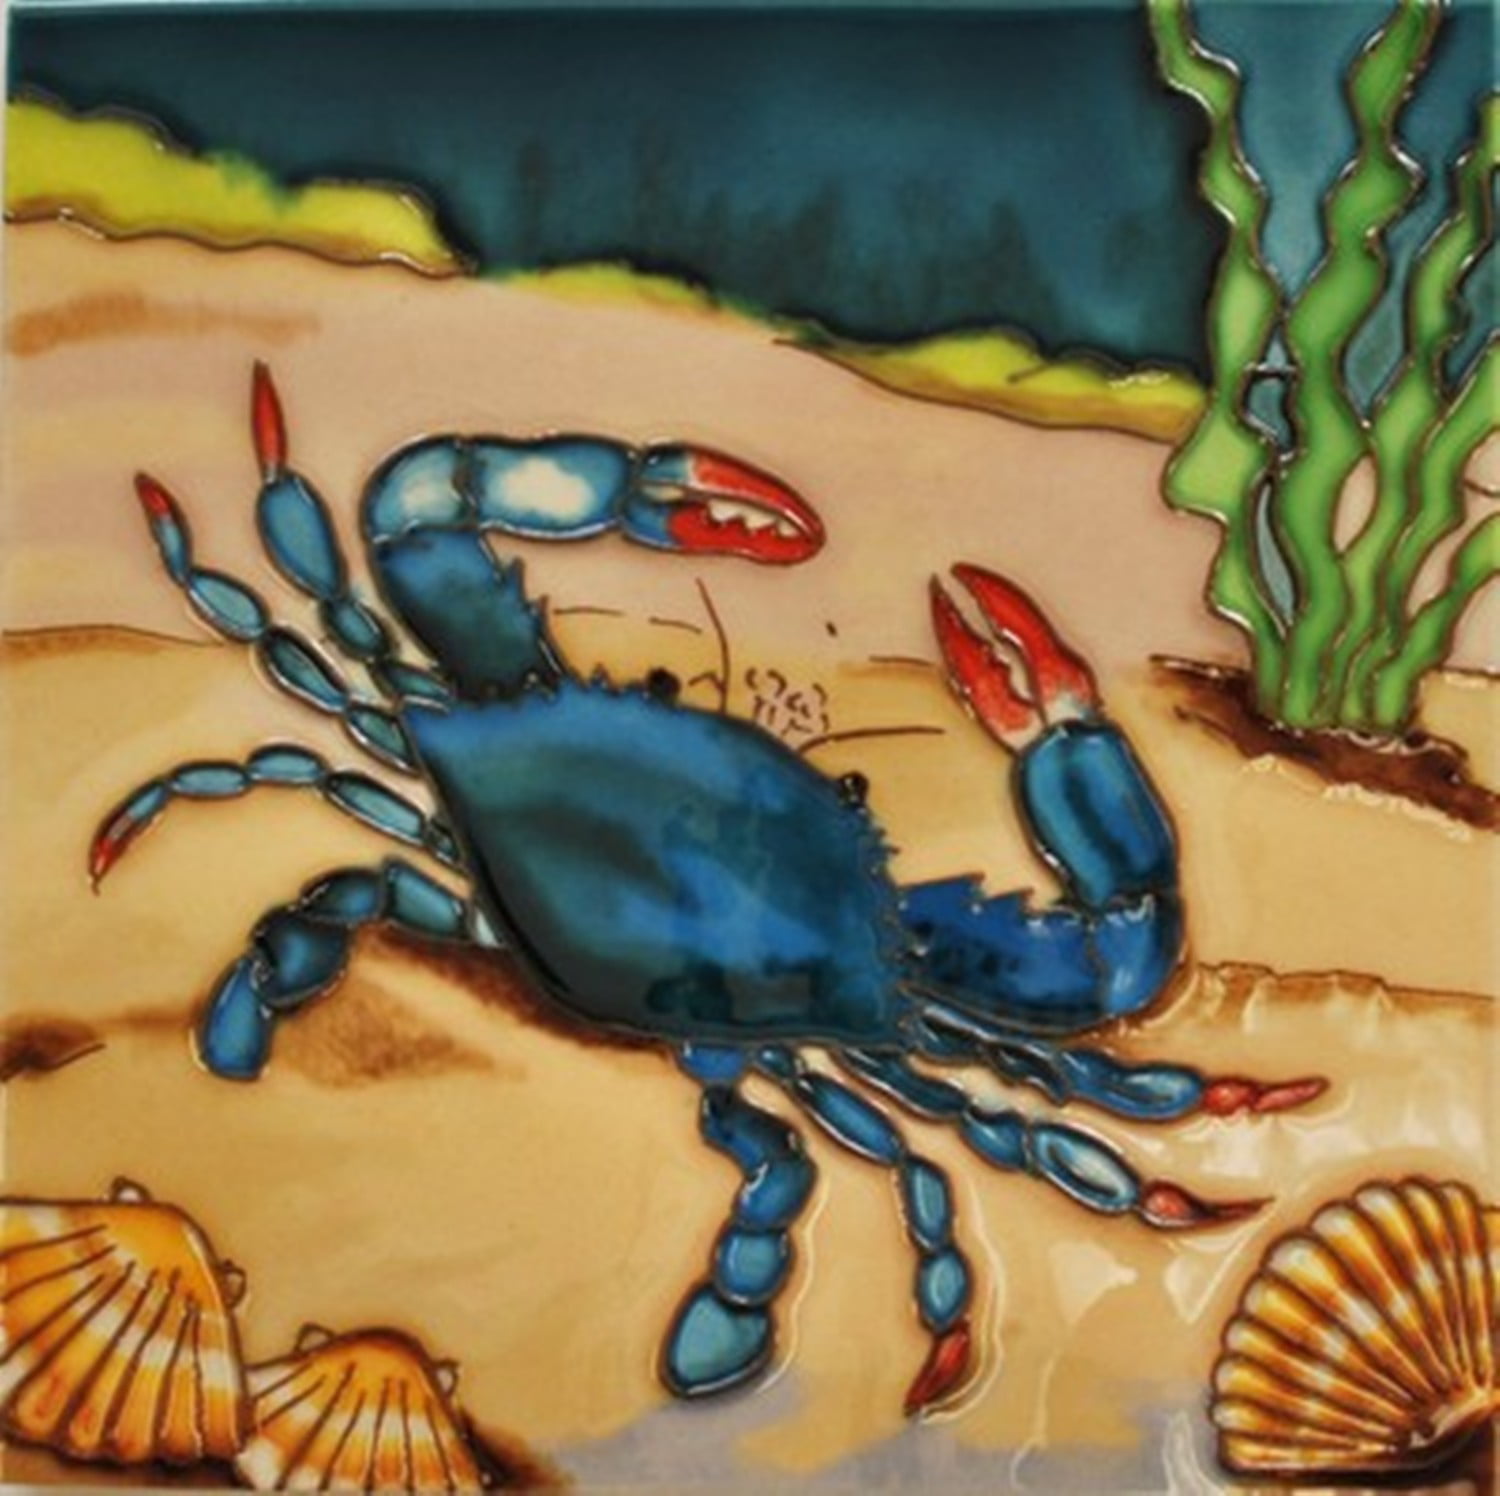 Blue crab hand painted ceramic art tile 8 x 10 inches with back and hooks 